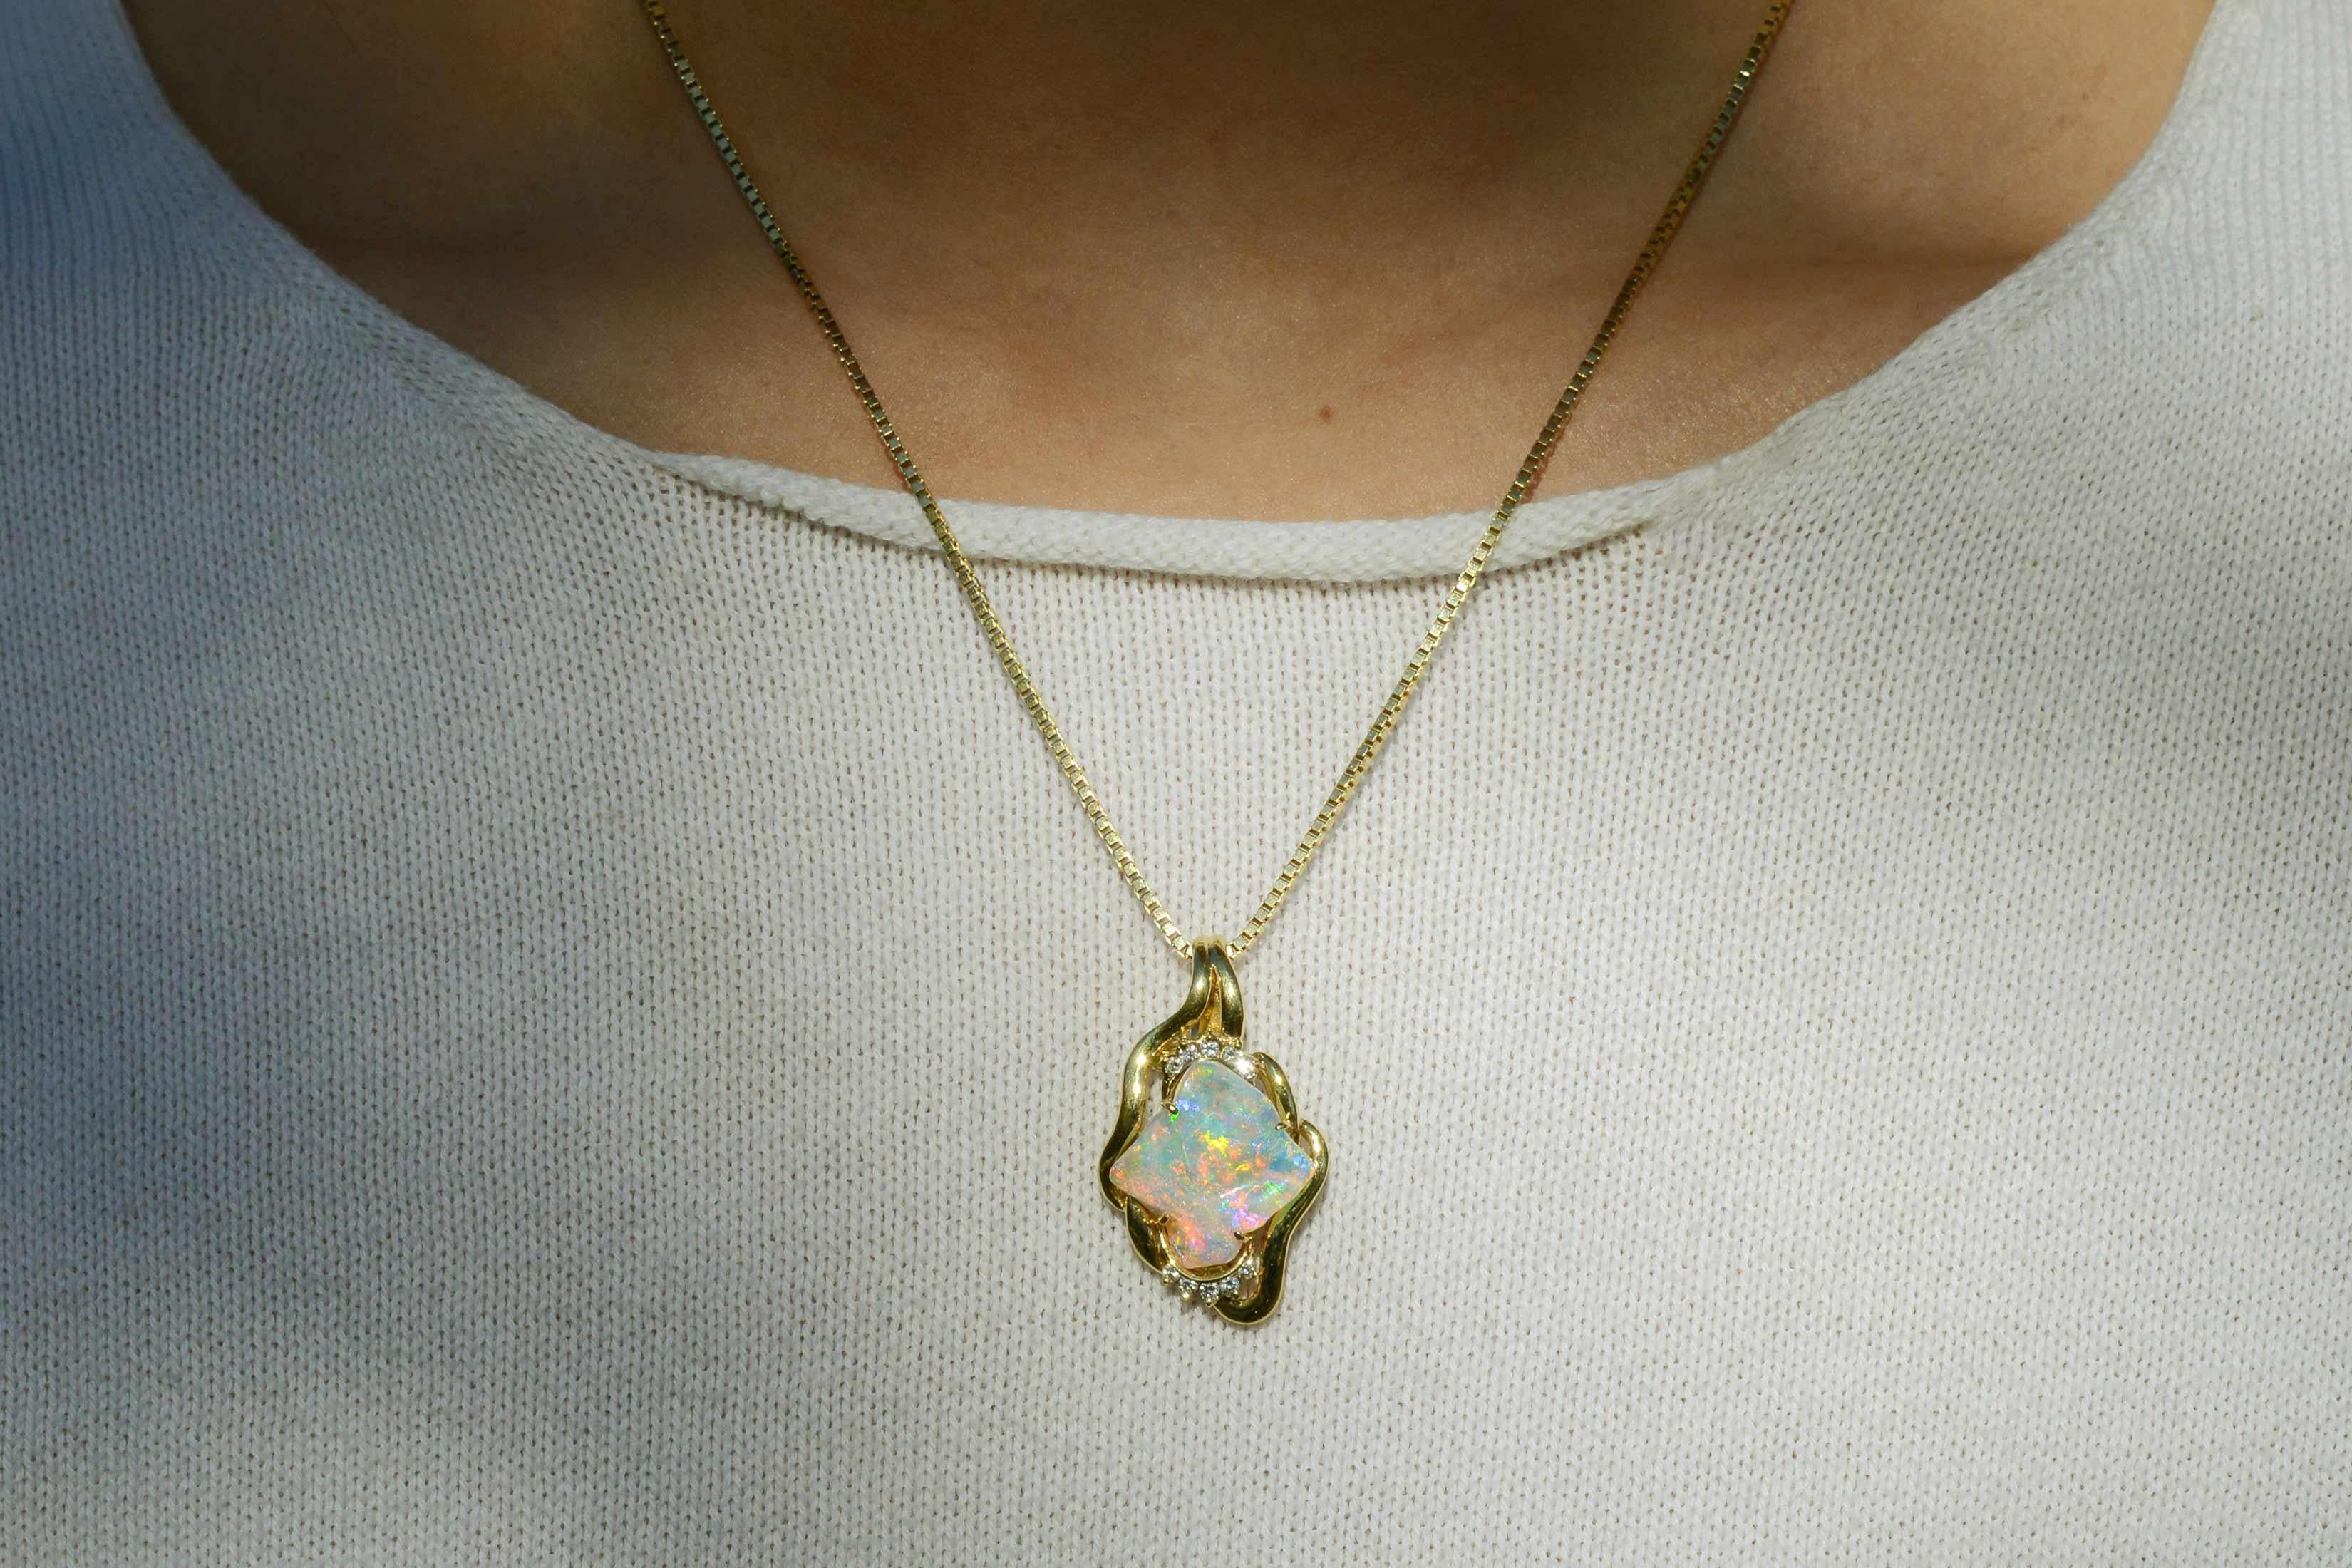 A truly beautiful Australian opal centers on this pendant. The opal displays rich, flashing blues and greens, flowing into fiery red and orange. We love the irregularly shaped opal that is accentuated by the buttery 18k yellow gold frame studded